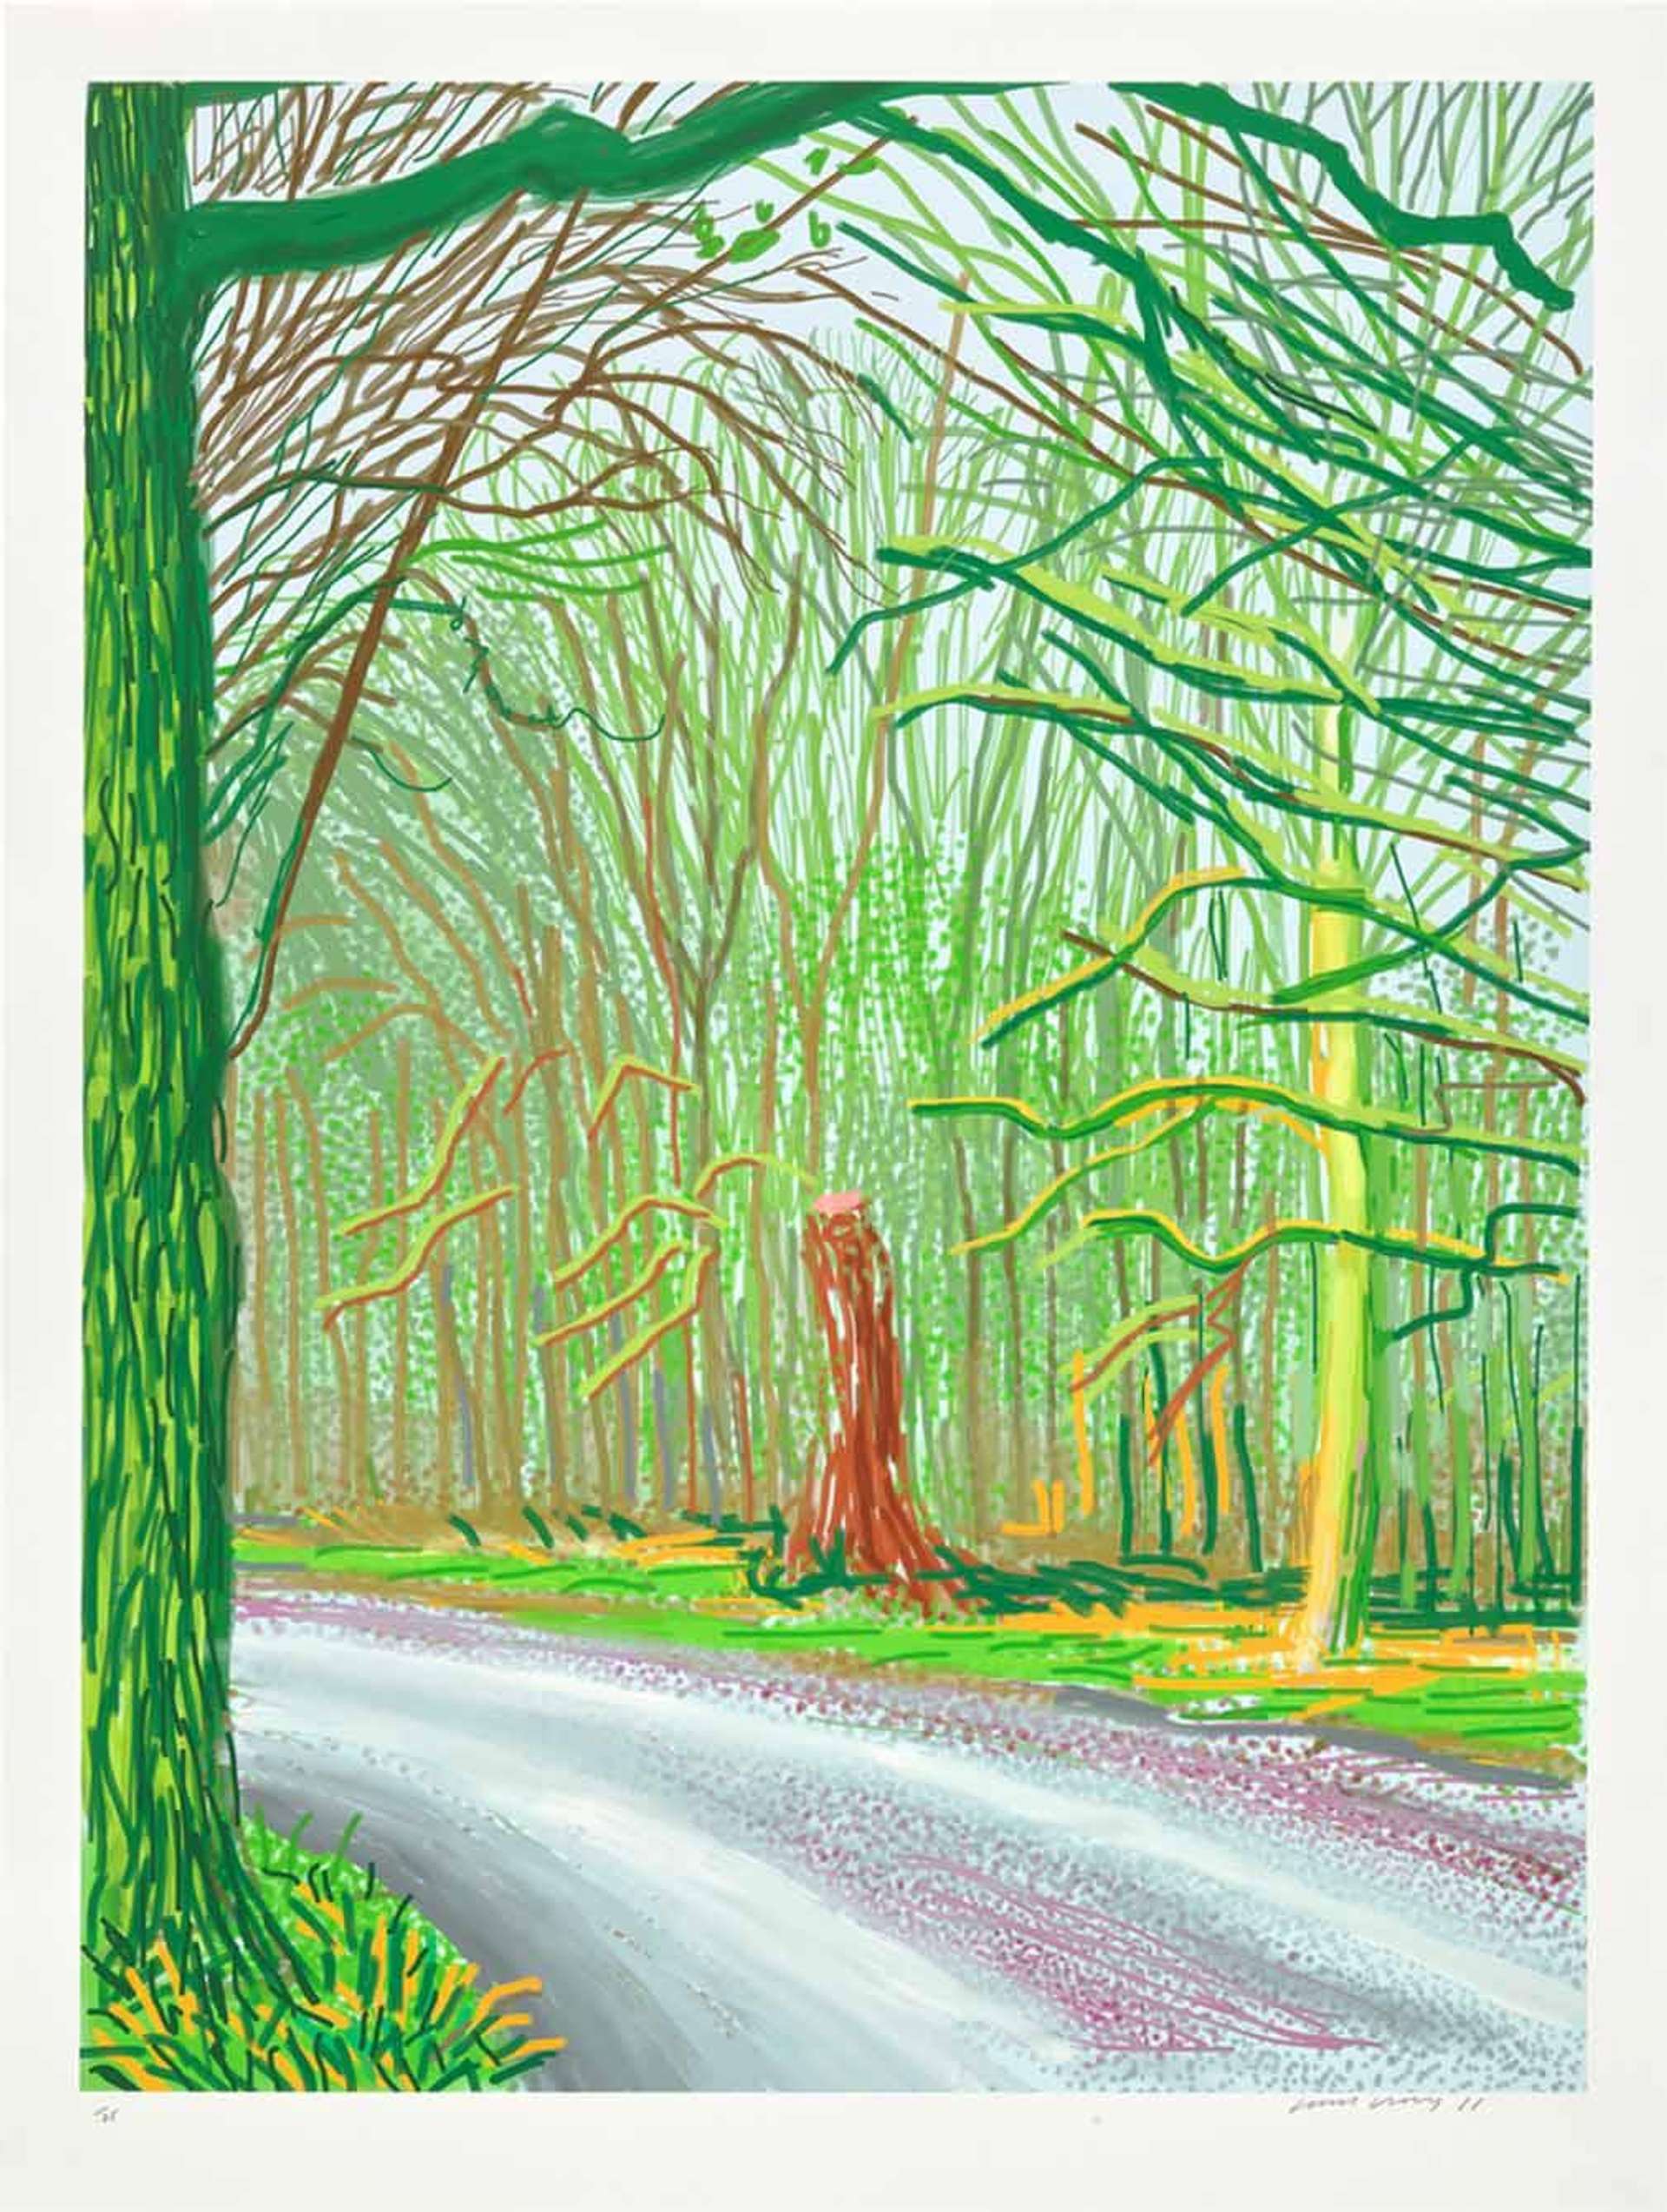 A road curves to the bottom left of the composition, with bright green trees and branched framing the scene.